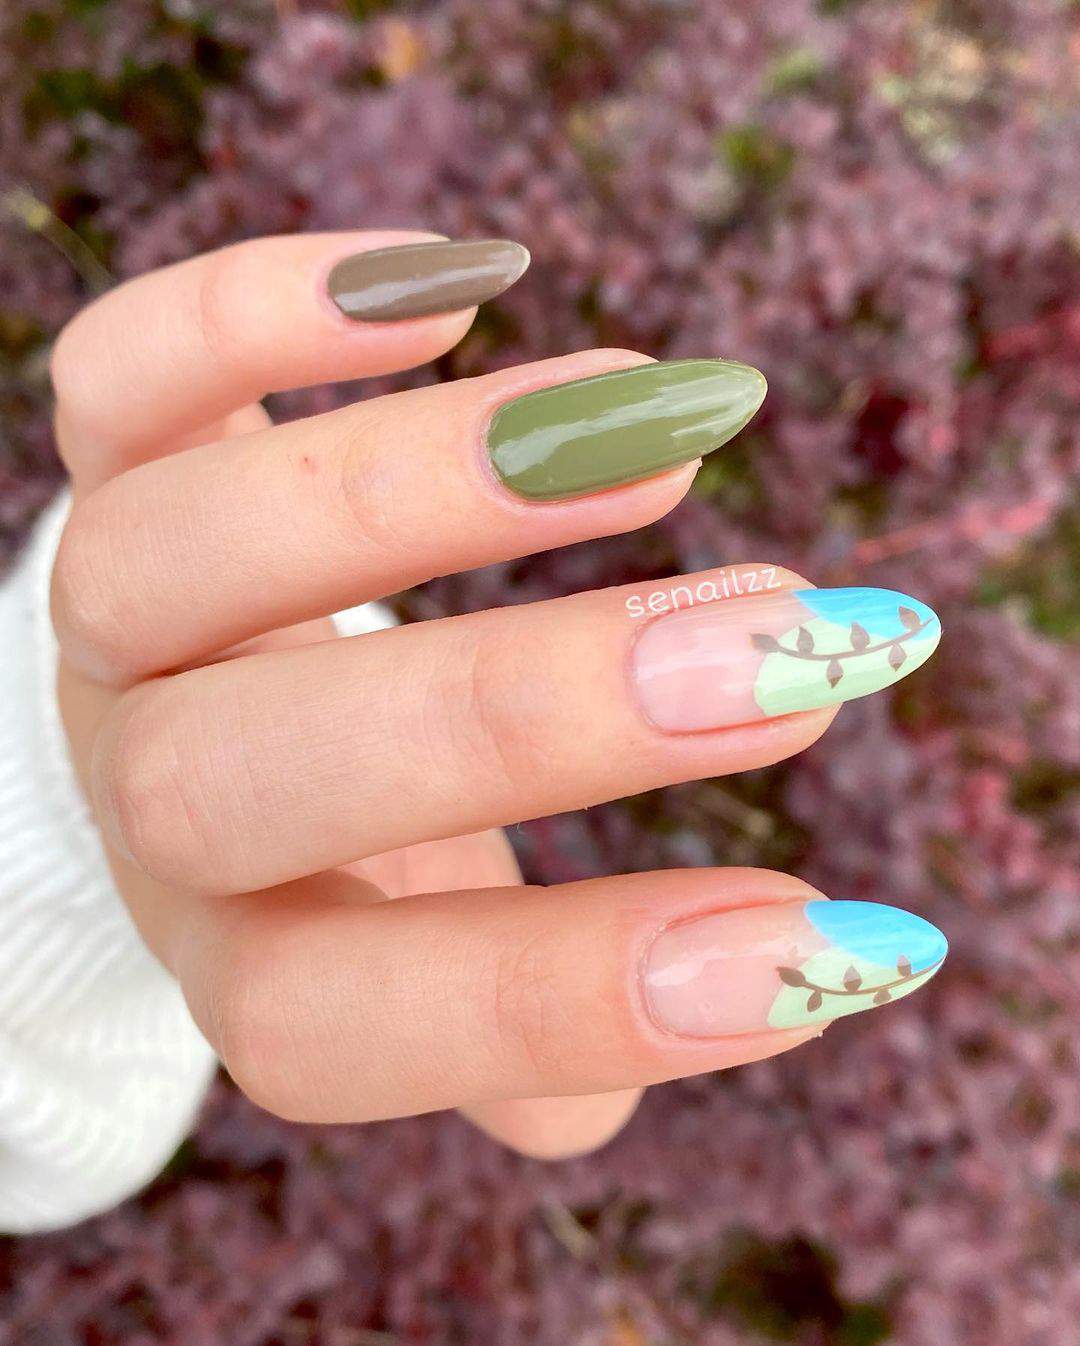 The 100+ Best Nail Designs Trends And Ideas In 2021 images 66